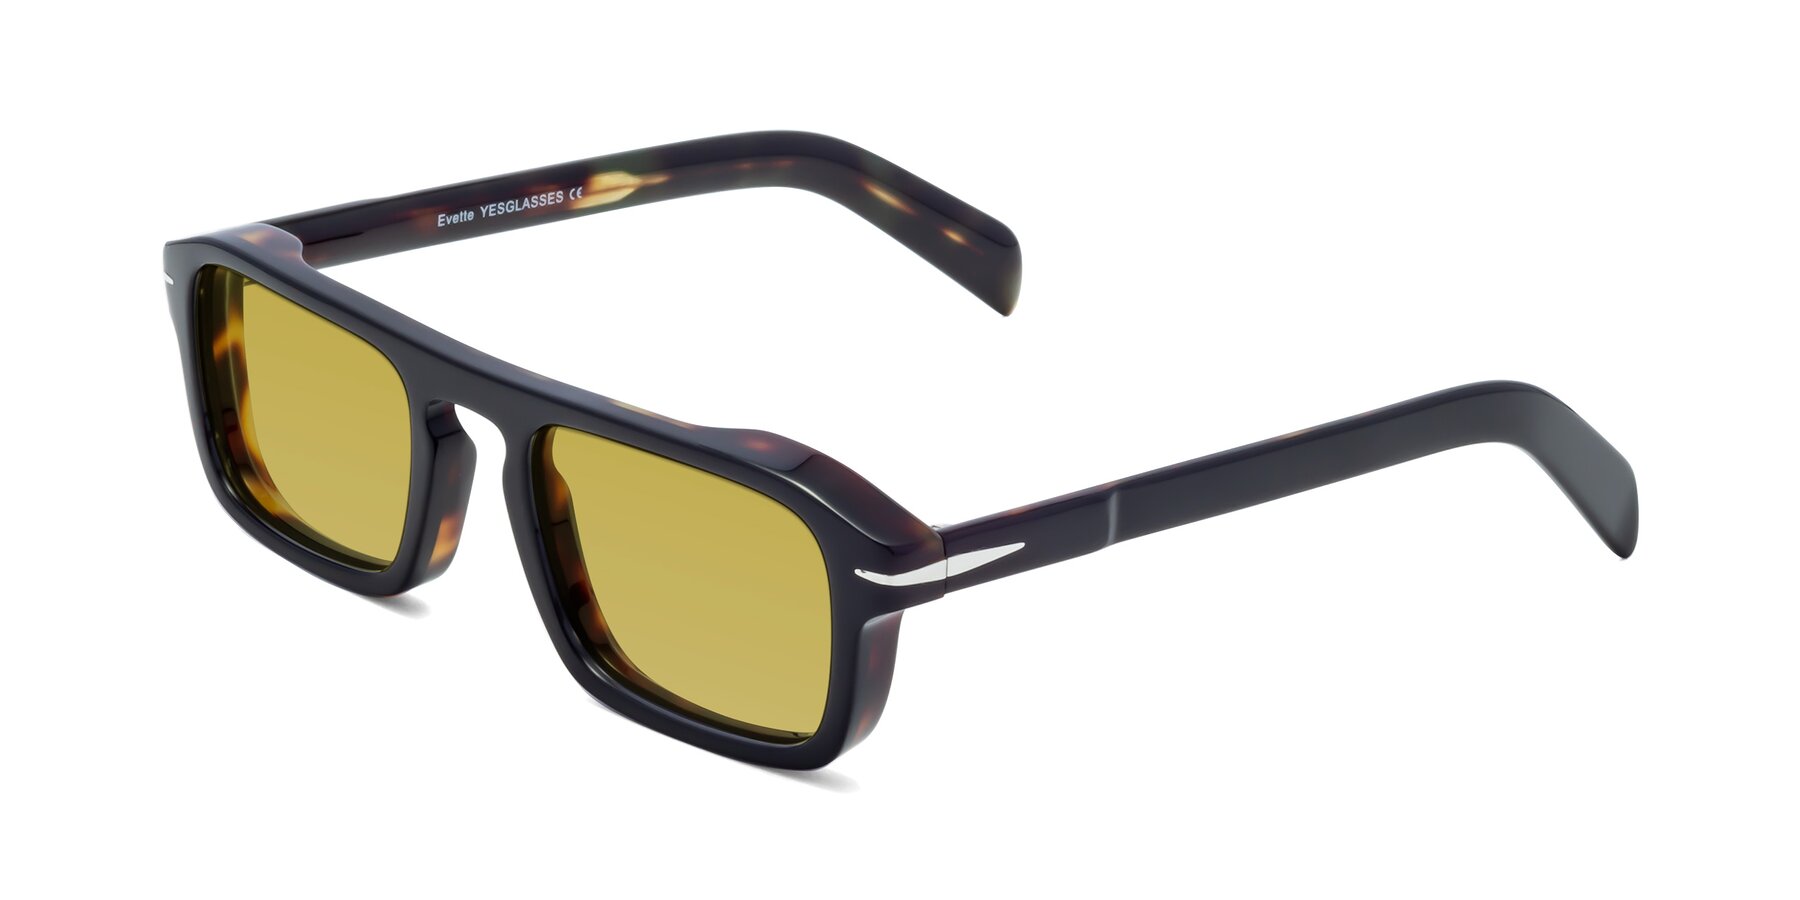 Angle of Evette in Black-Tortoise with Champagne Tinted Lenses